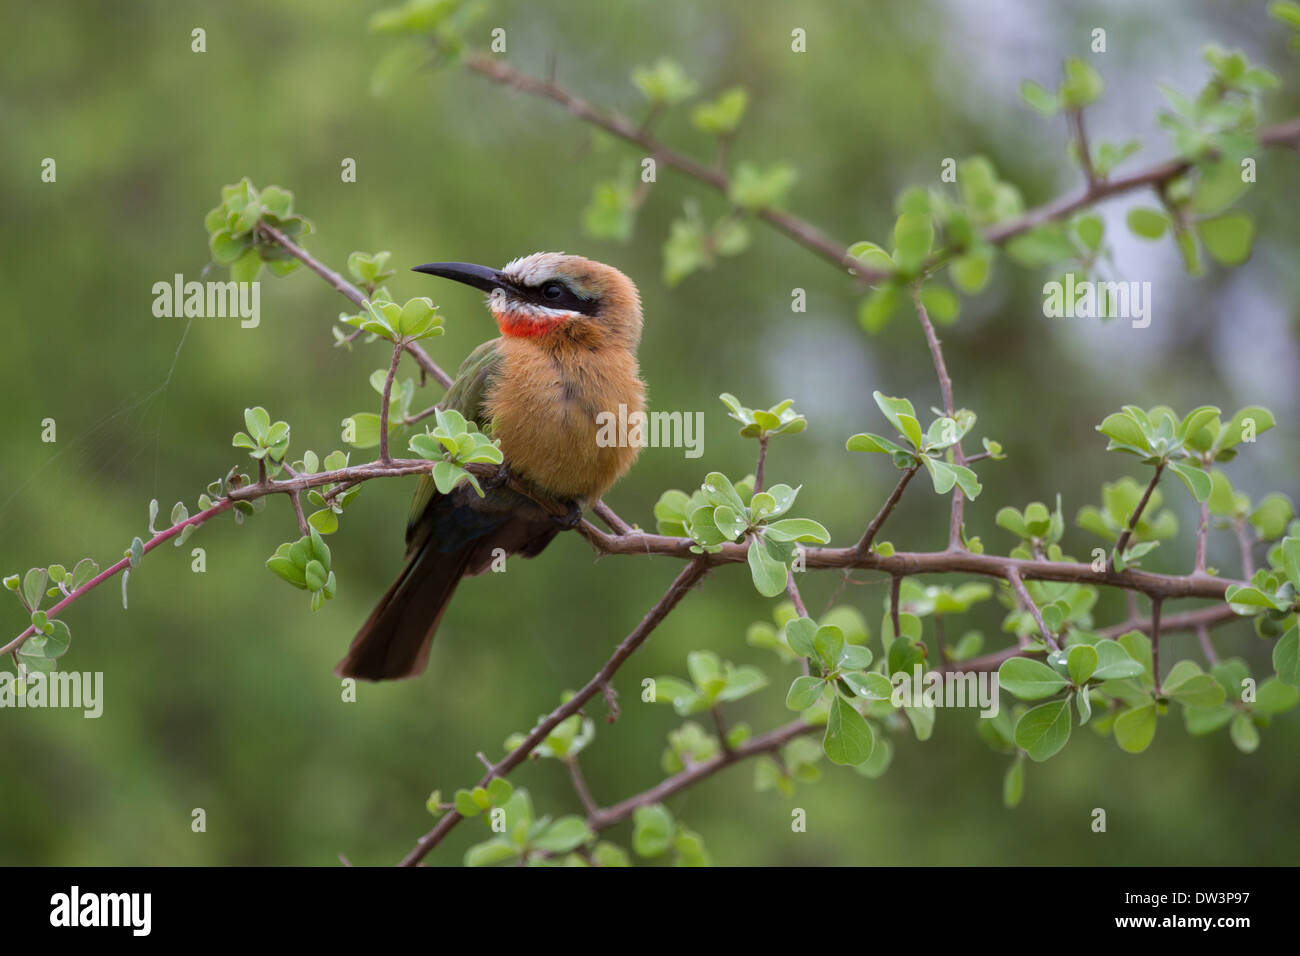 White-fronted Bee-eater (Merops bullockoides) drying after a rain shower Stock Photo